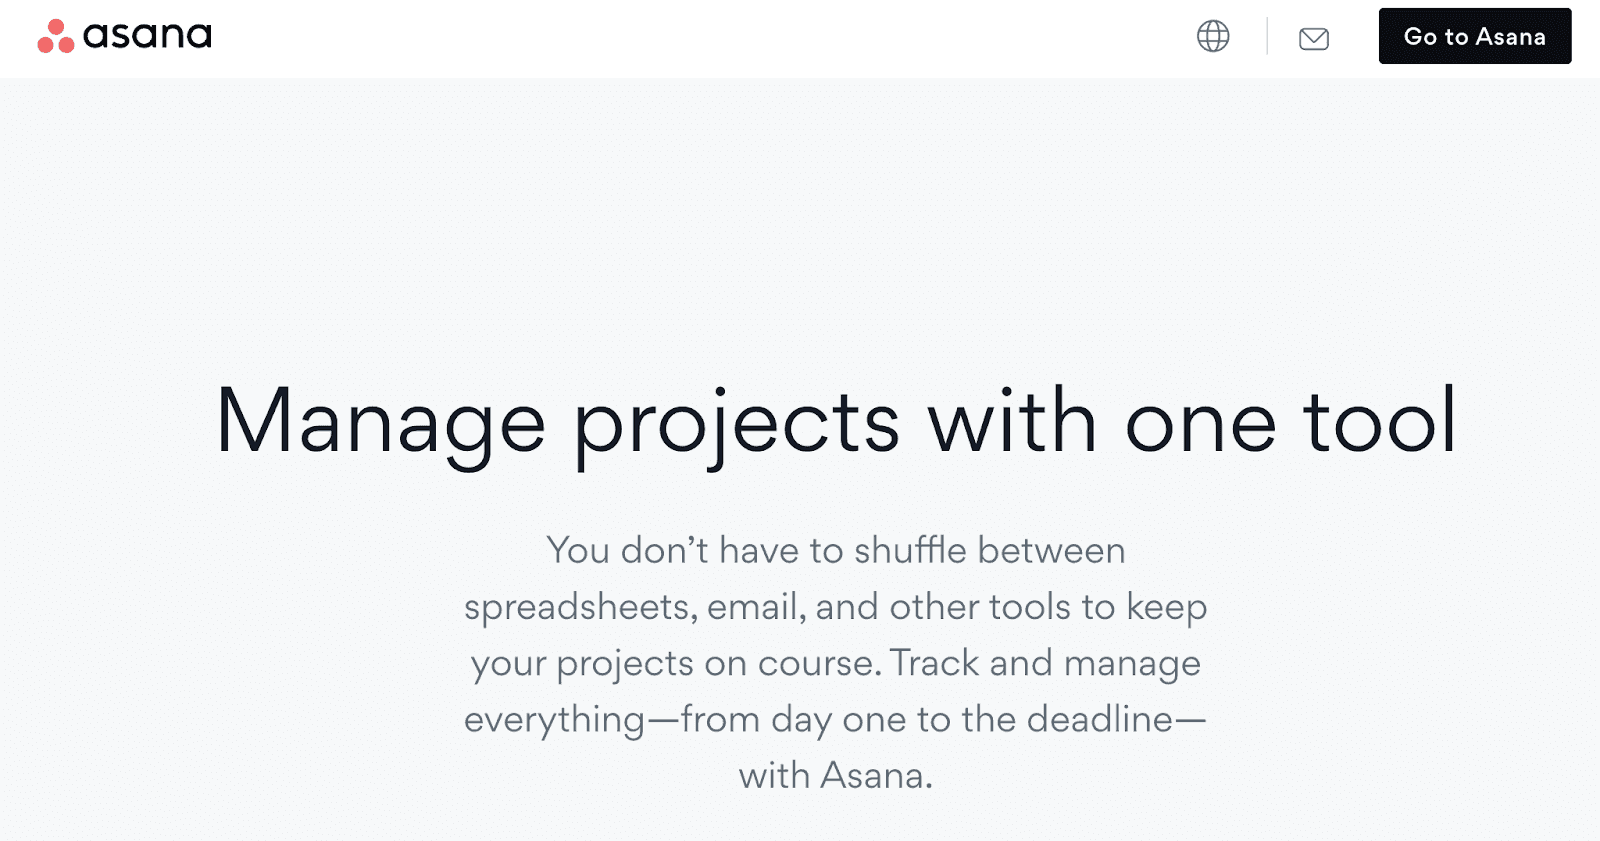 Asana allows teams to collaborate more efficiently, and allows the user to track and manage changes 